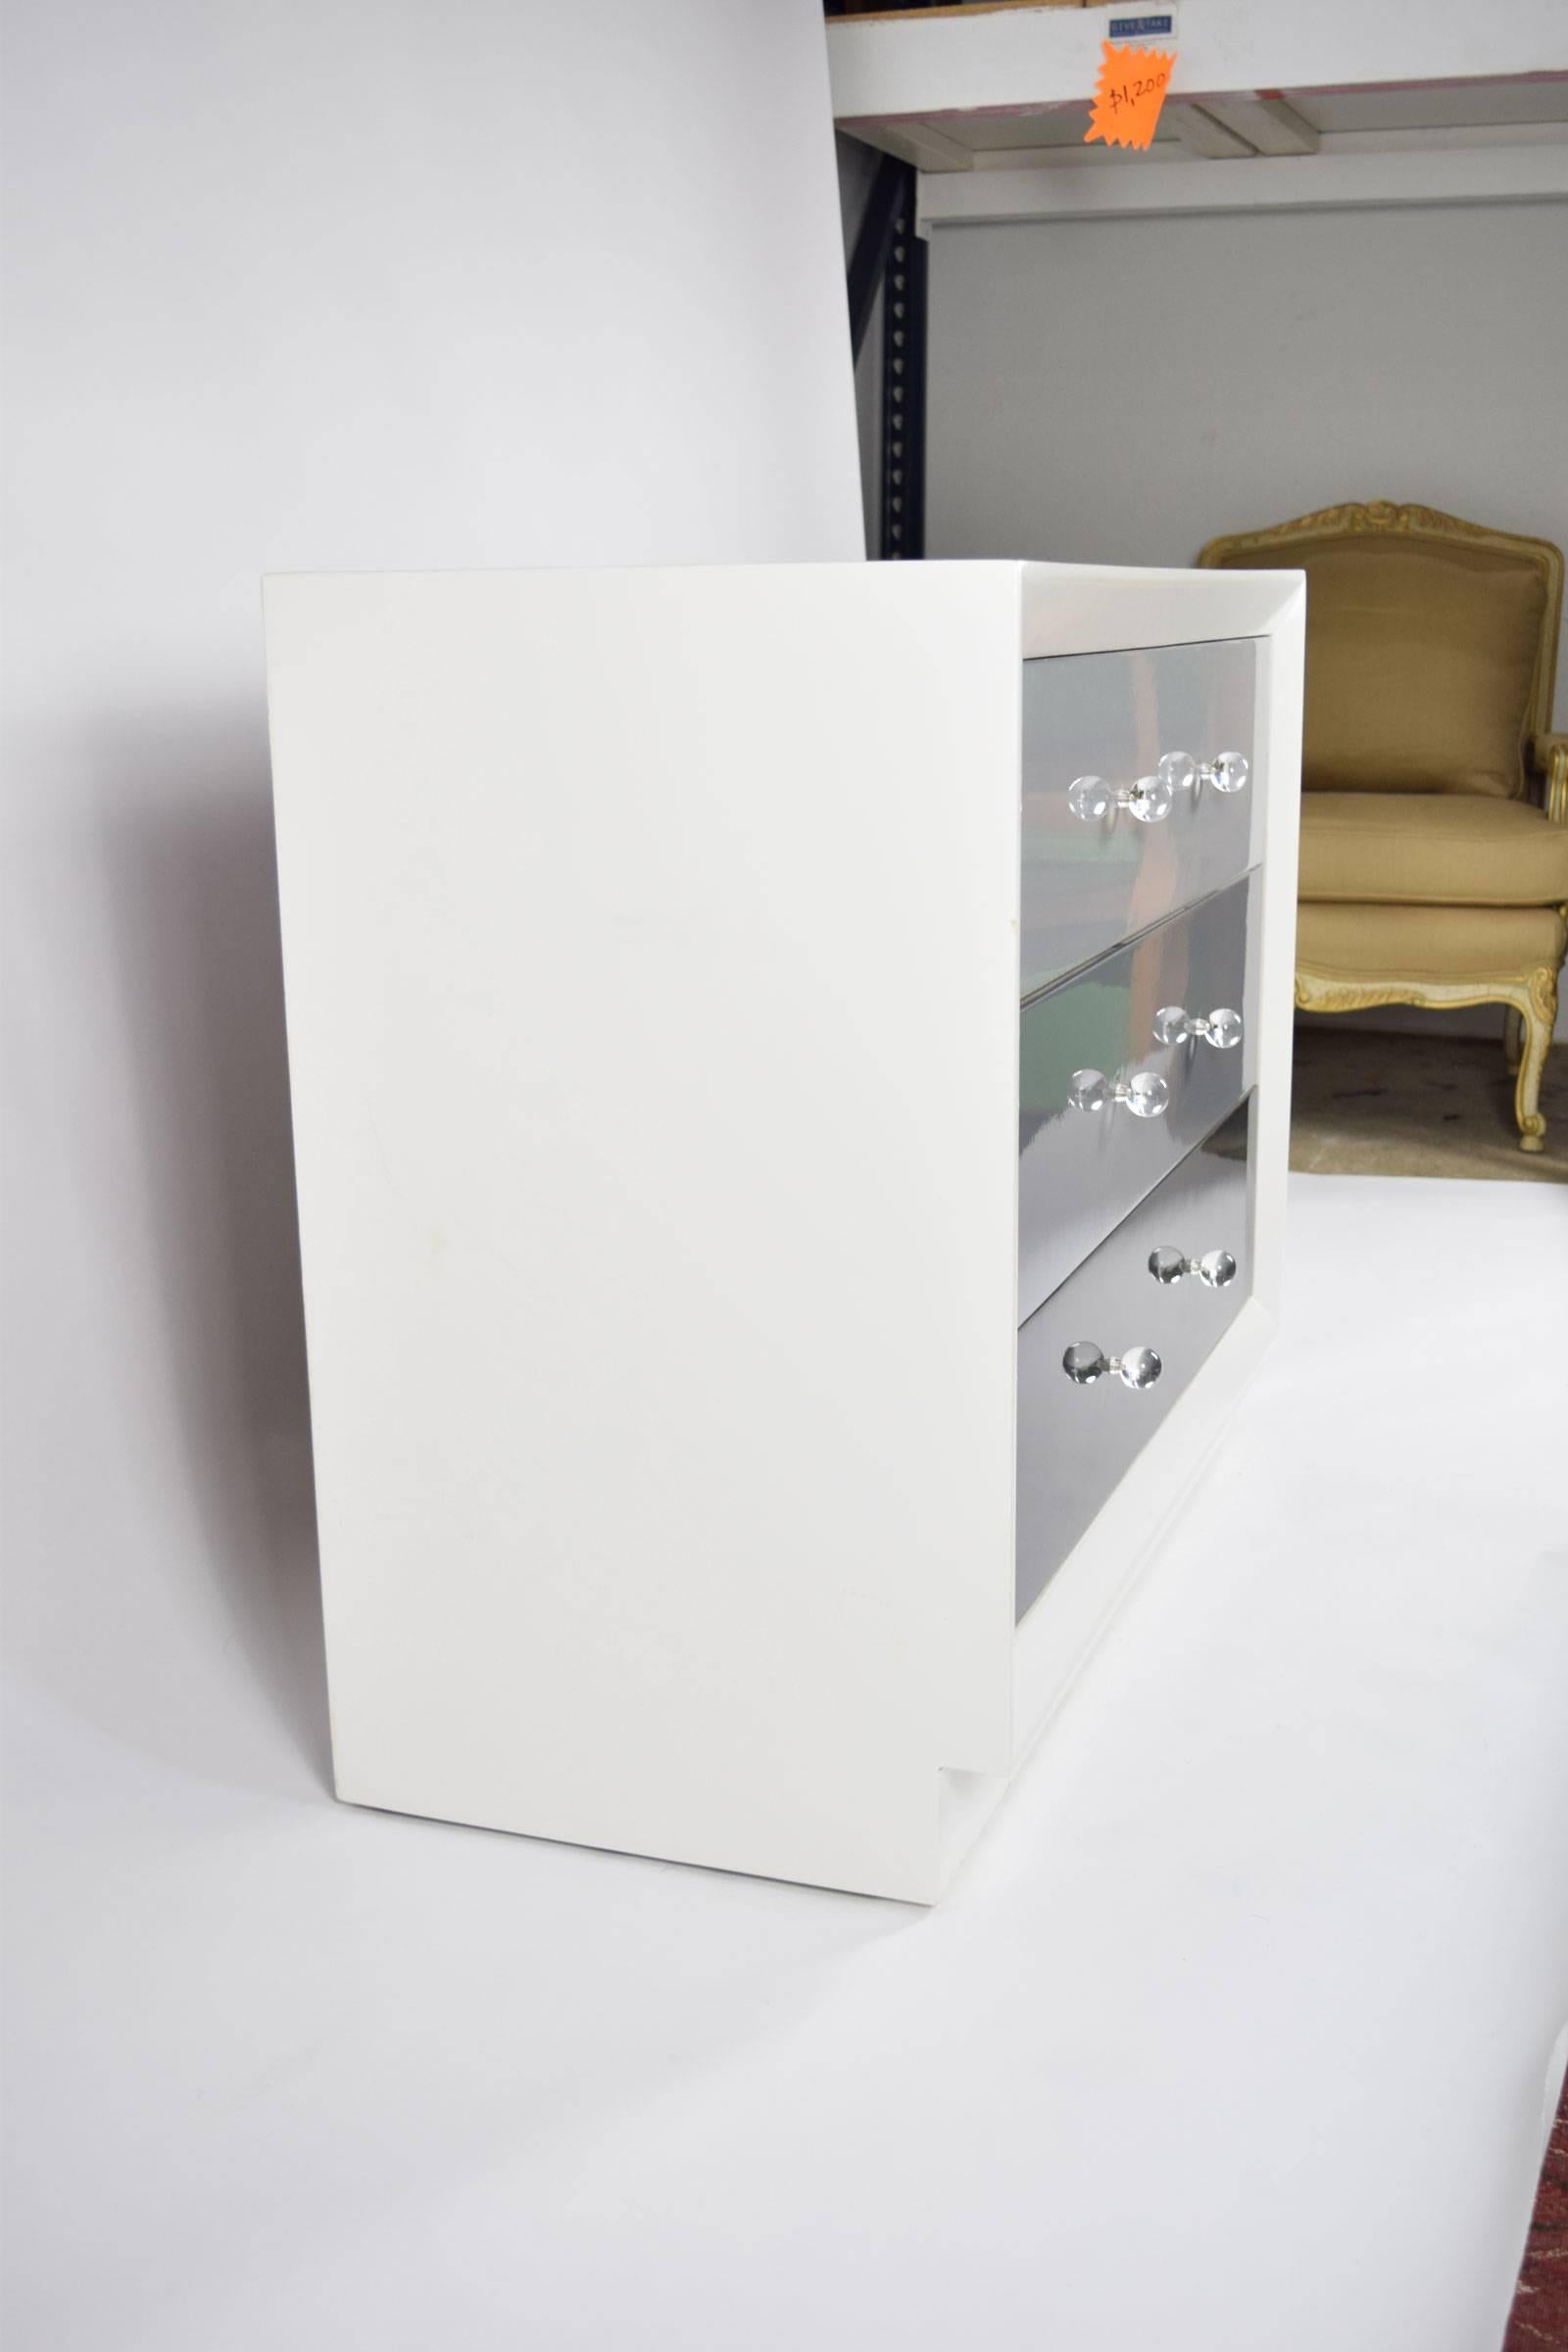 Pair of chests by John Staurt in new lacquer. Colors are white and tones of grey with Lucite/acrylic knobs.